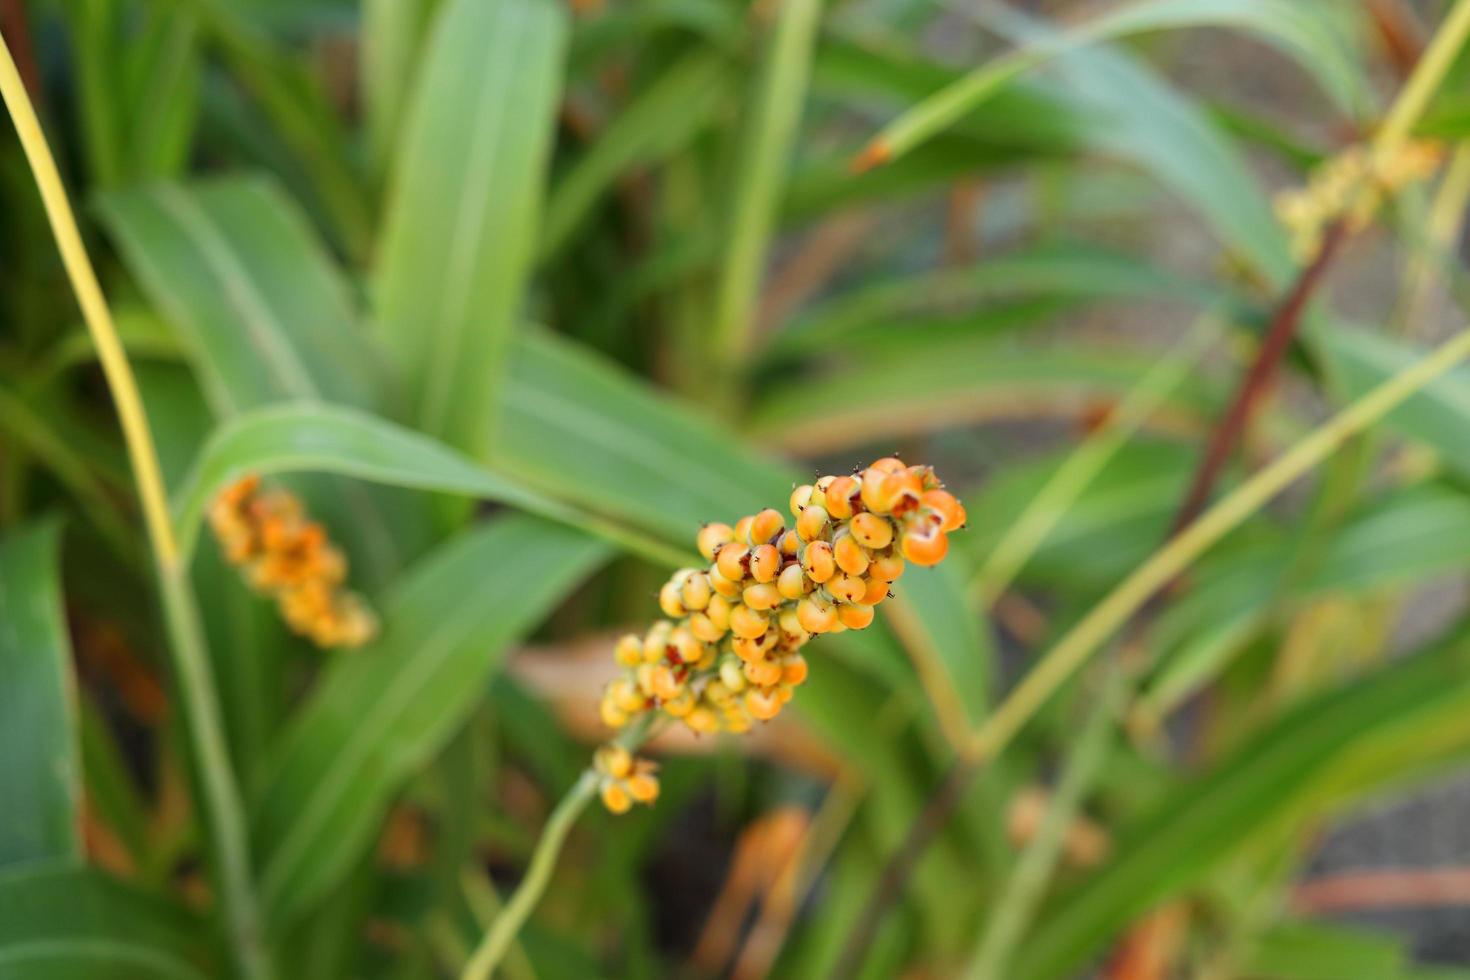 Light orange ripe seed of millet or sorghum on branch and blur green leaves background, Thailand. photo